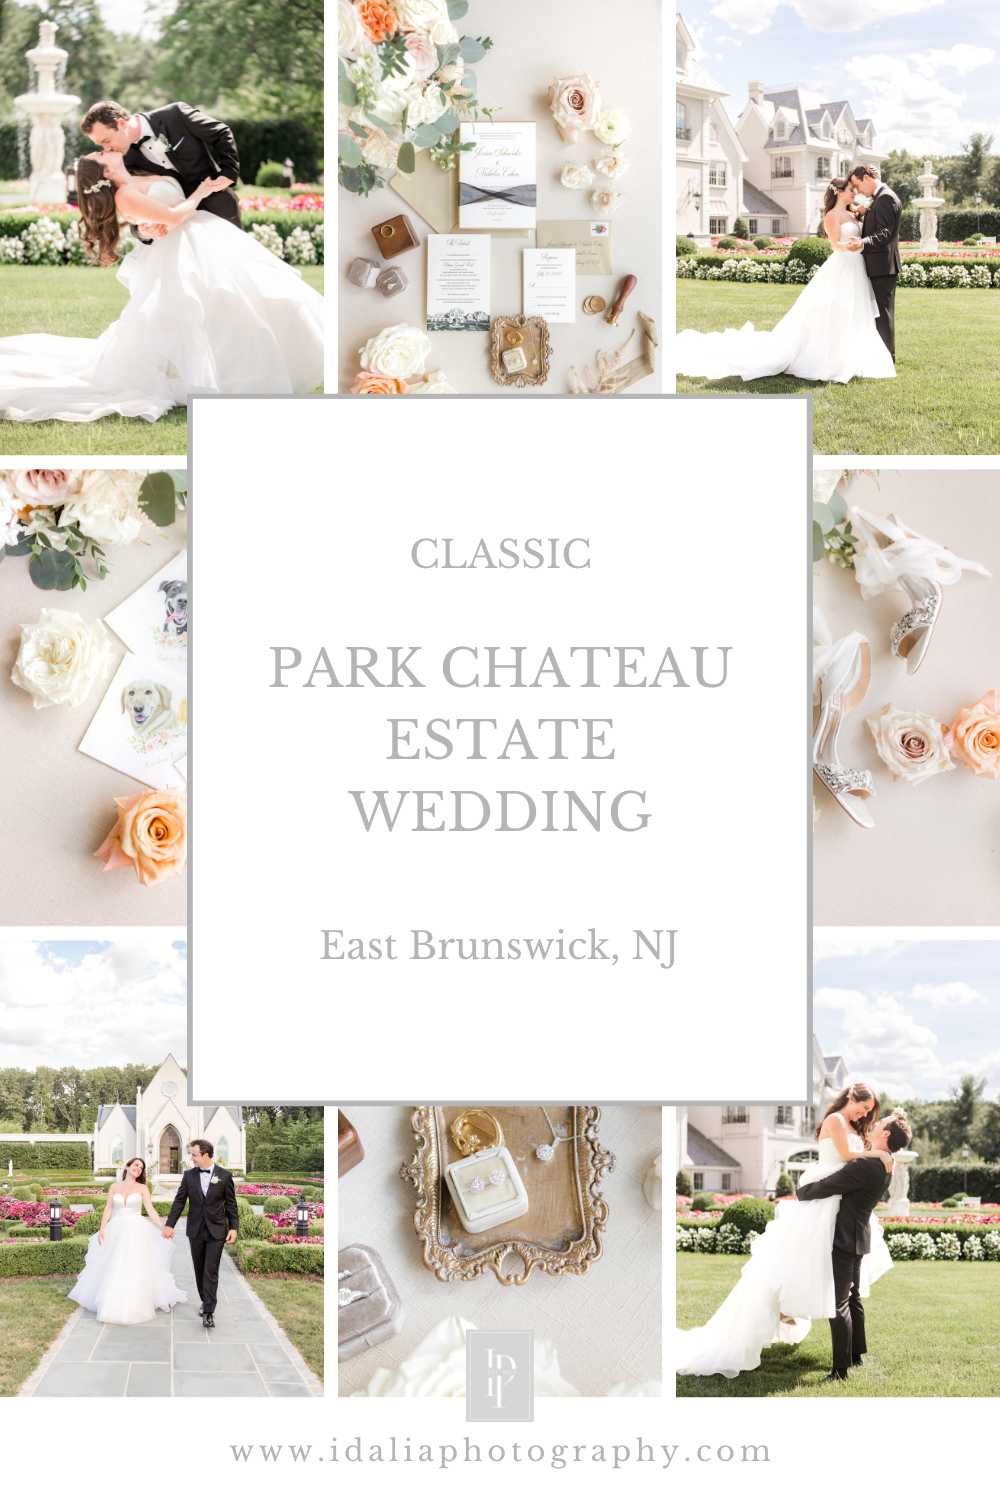 Park Chateau Estate Wedding in the summer with elegant pink and white details photographed by New Jersey photographer Idalia Photography